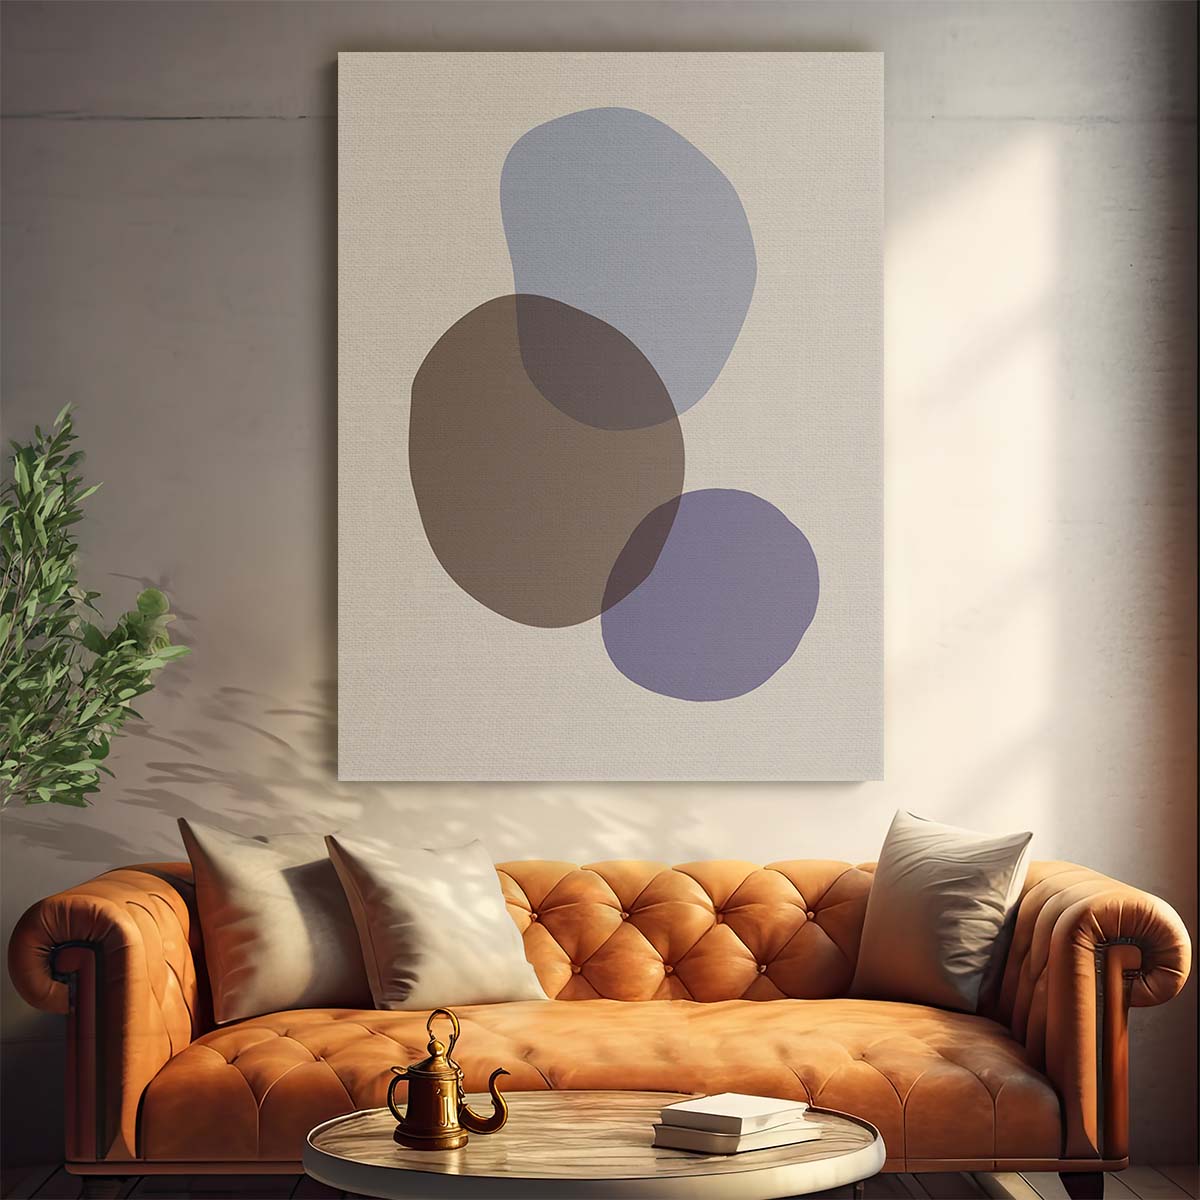 Minimalist Organic Geometry Abstract Illustration Wall Art by Luxuriance Designs, made in USA